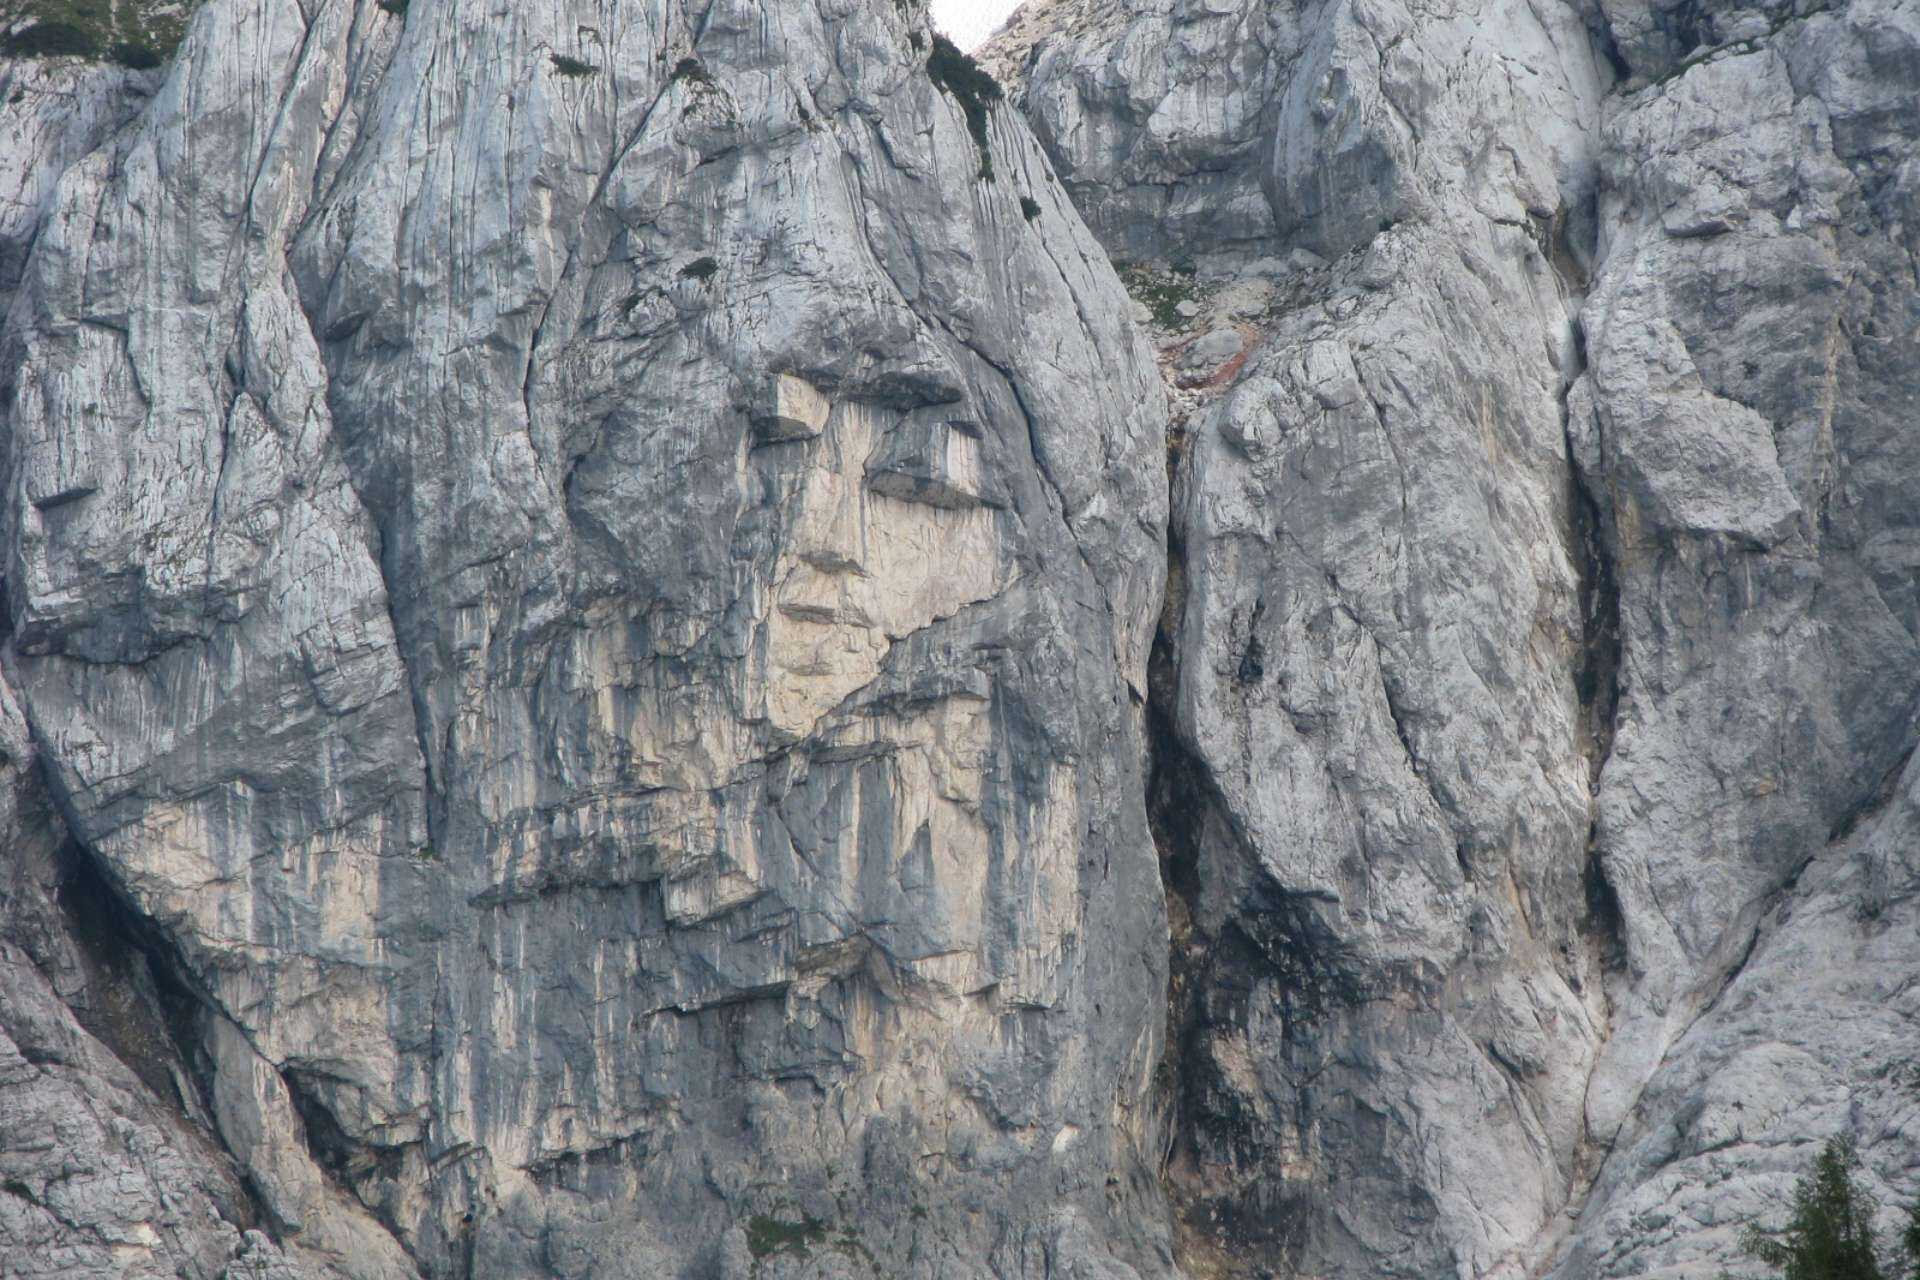 Ajdovska deklica - a natural rock formation on Mount Prisojnik in Slovenia that looks like the face of a young woman